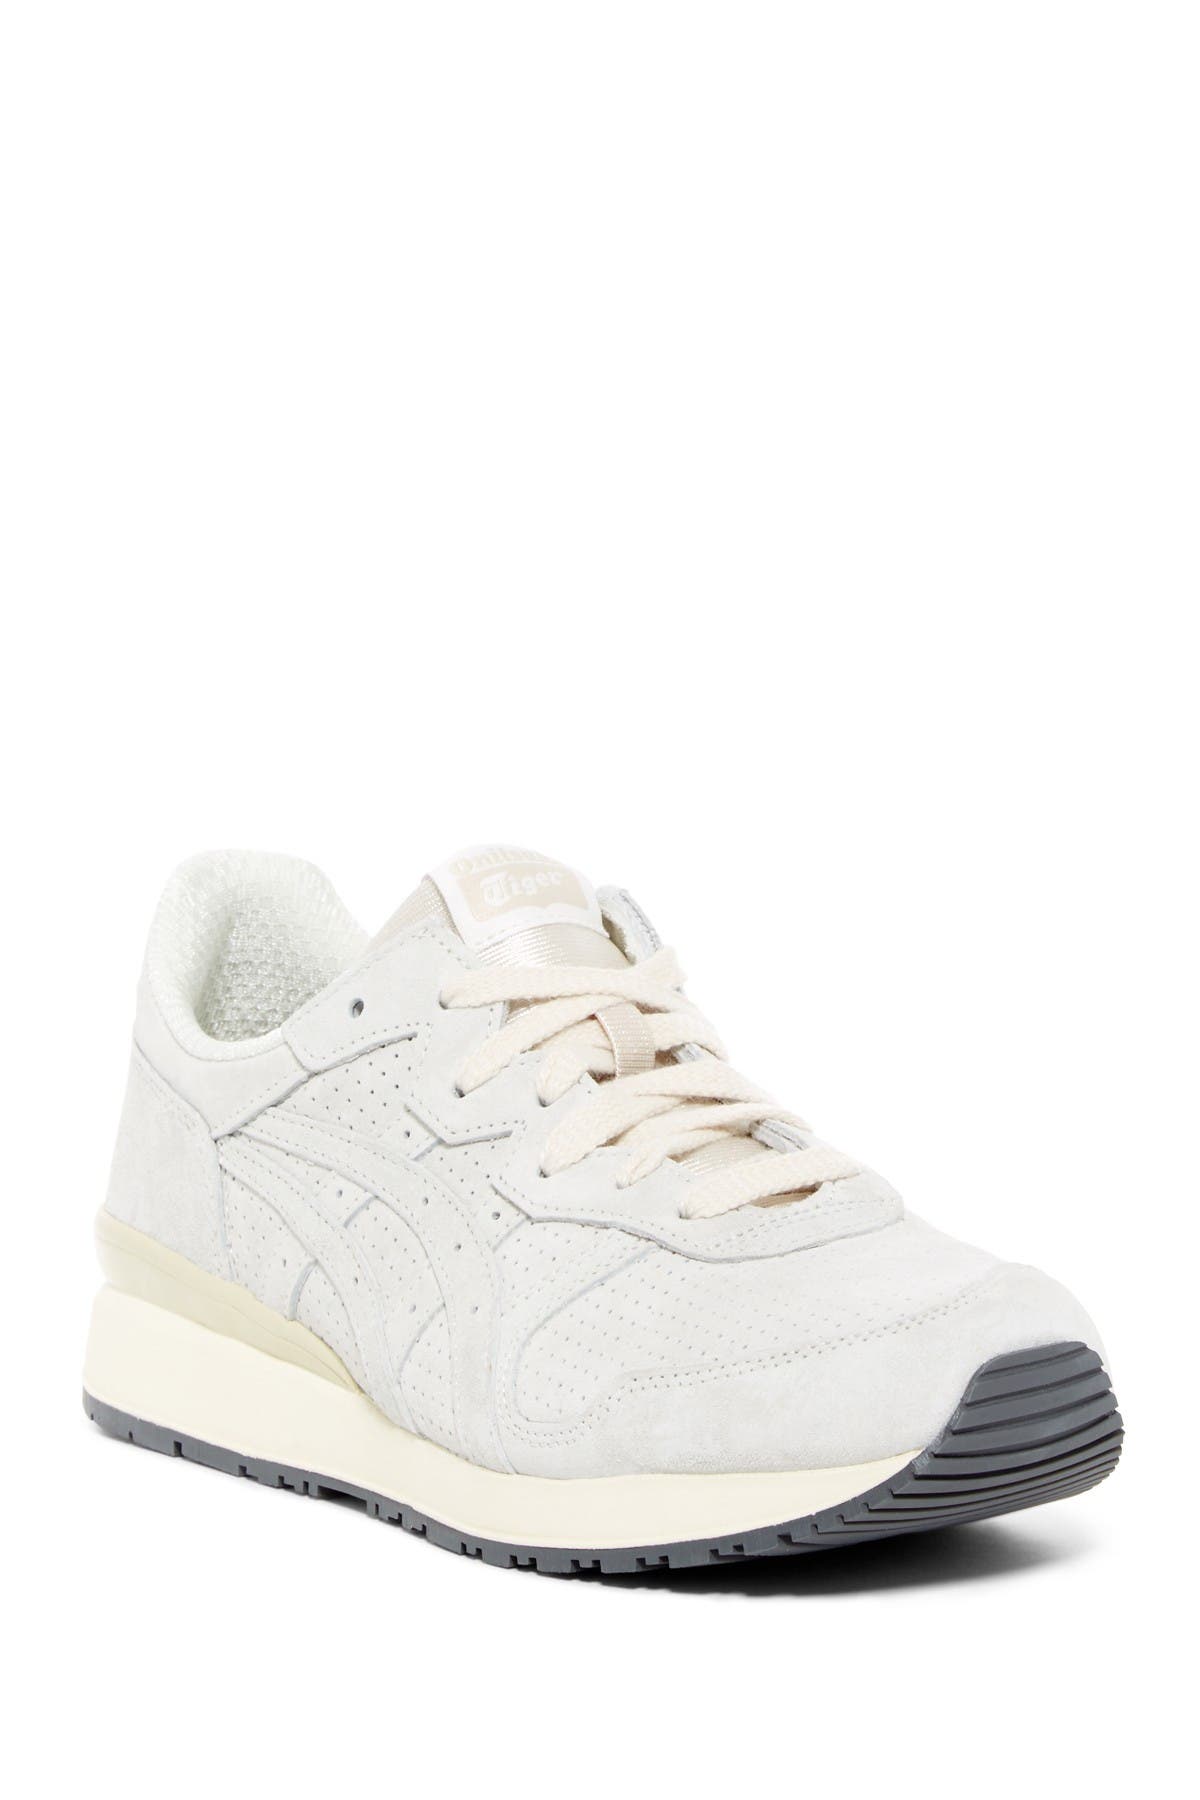 ASICS | Tiger Ally Suede Sneaker 